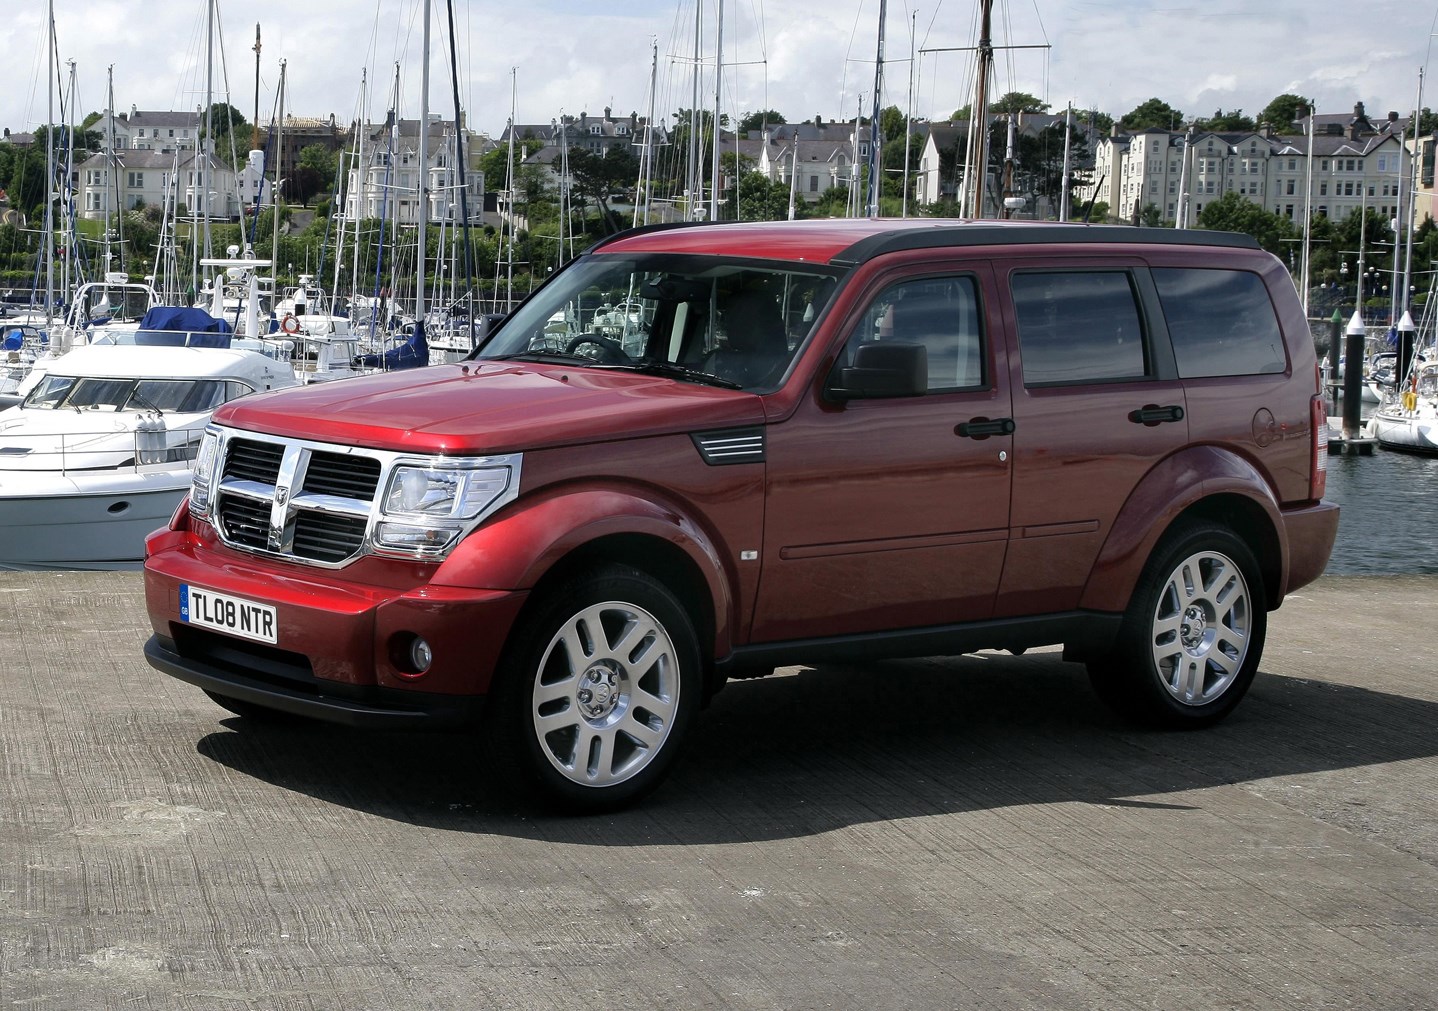 Used Dodge Nitro Station Wagon 2007 2009 Review Parkers